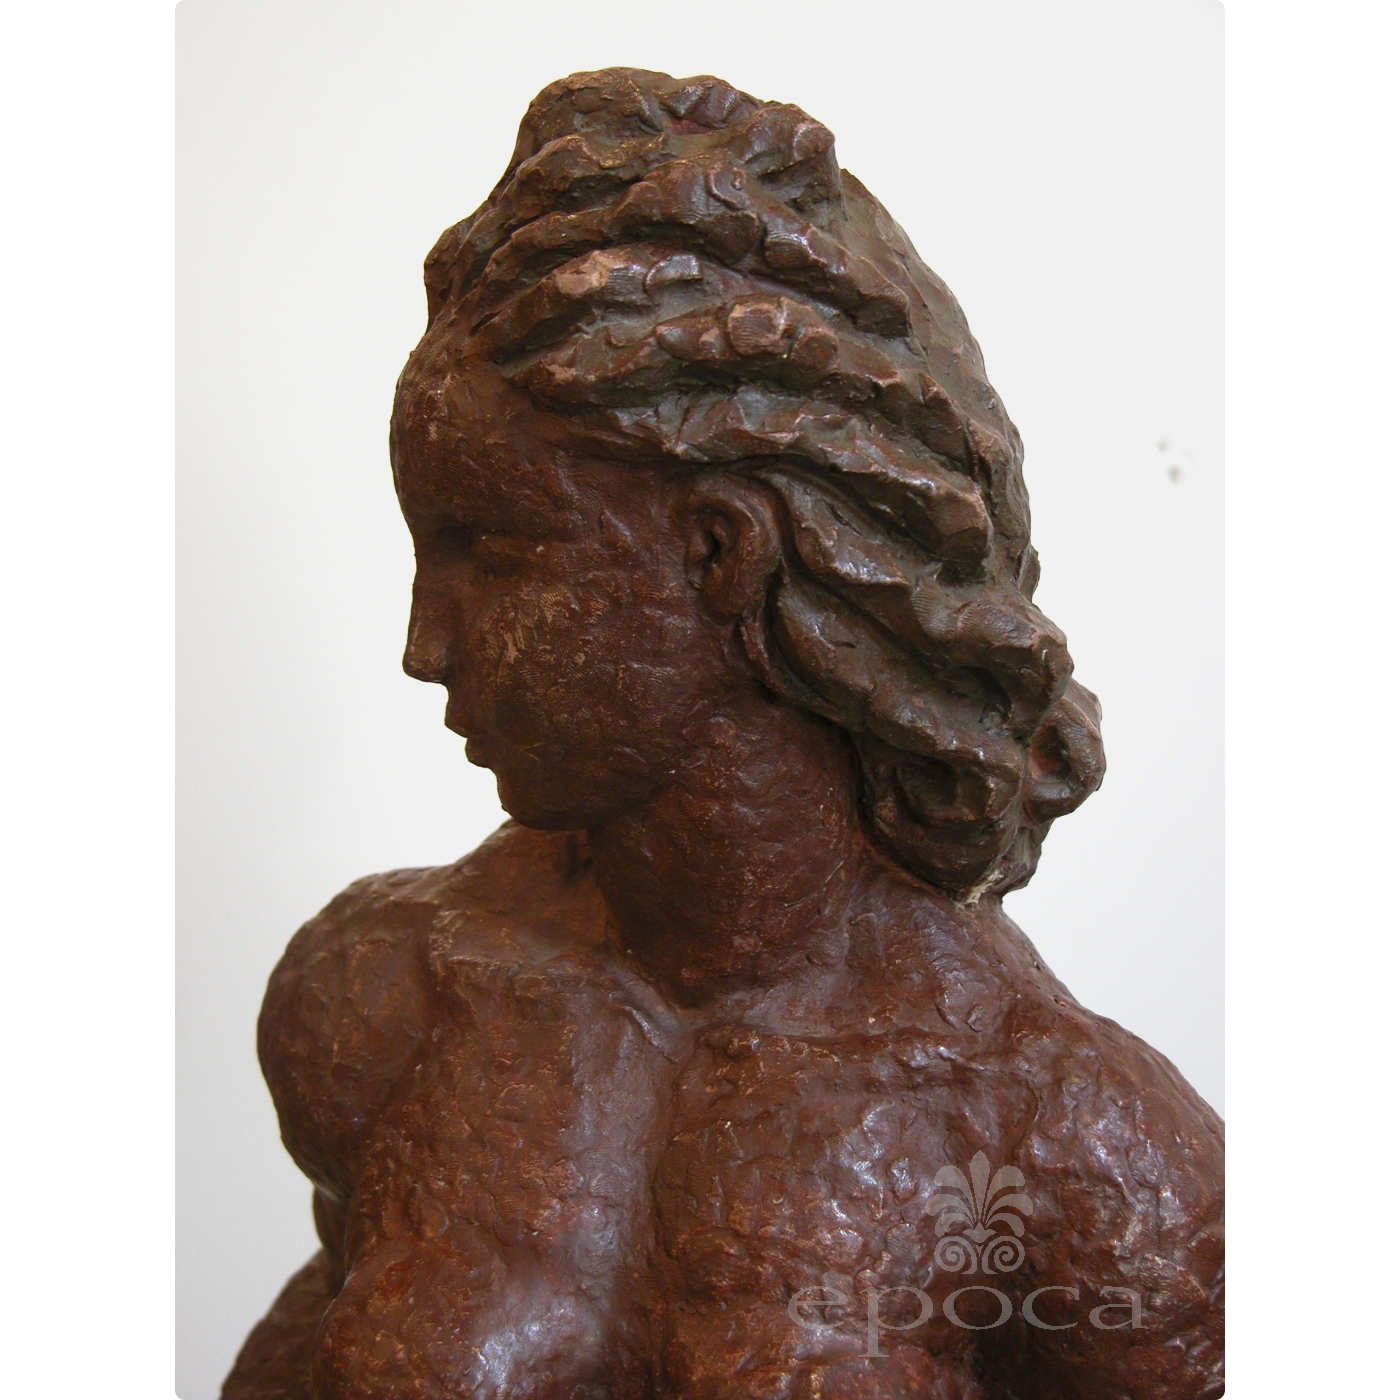 French BRONZE ART DECO DANCER STATUE nude lady sculpture marble Bourain Nymph for Sale in Australia